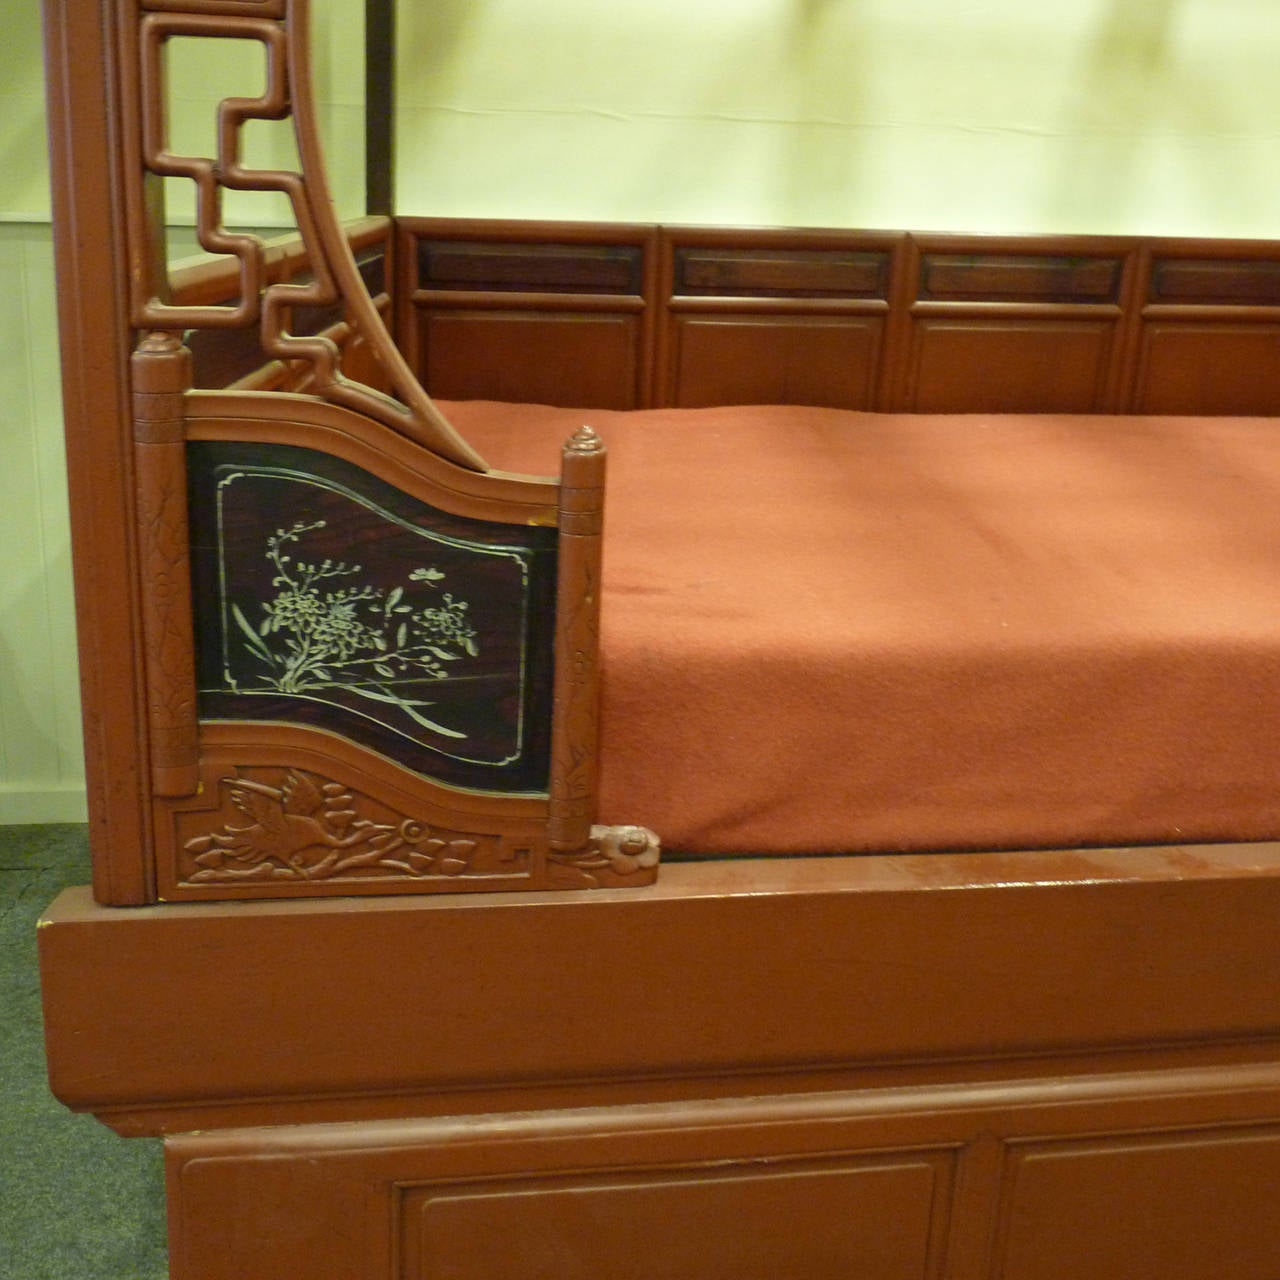 Late 20th century Chinese marriage bed made from an eastern hardwood and painted.

The price is for the bedstead frame alone. The base, mattress and bedding shown in the photograph are extra and can be provided by Seventh Heaven.

Height to